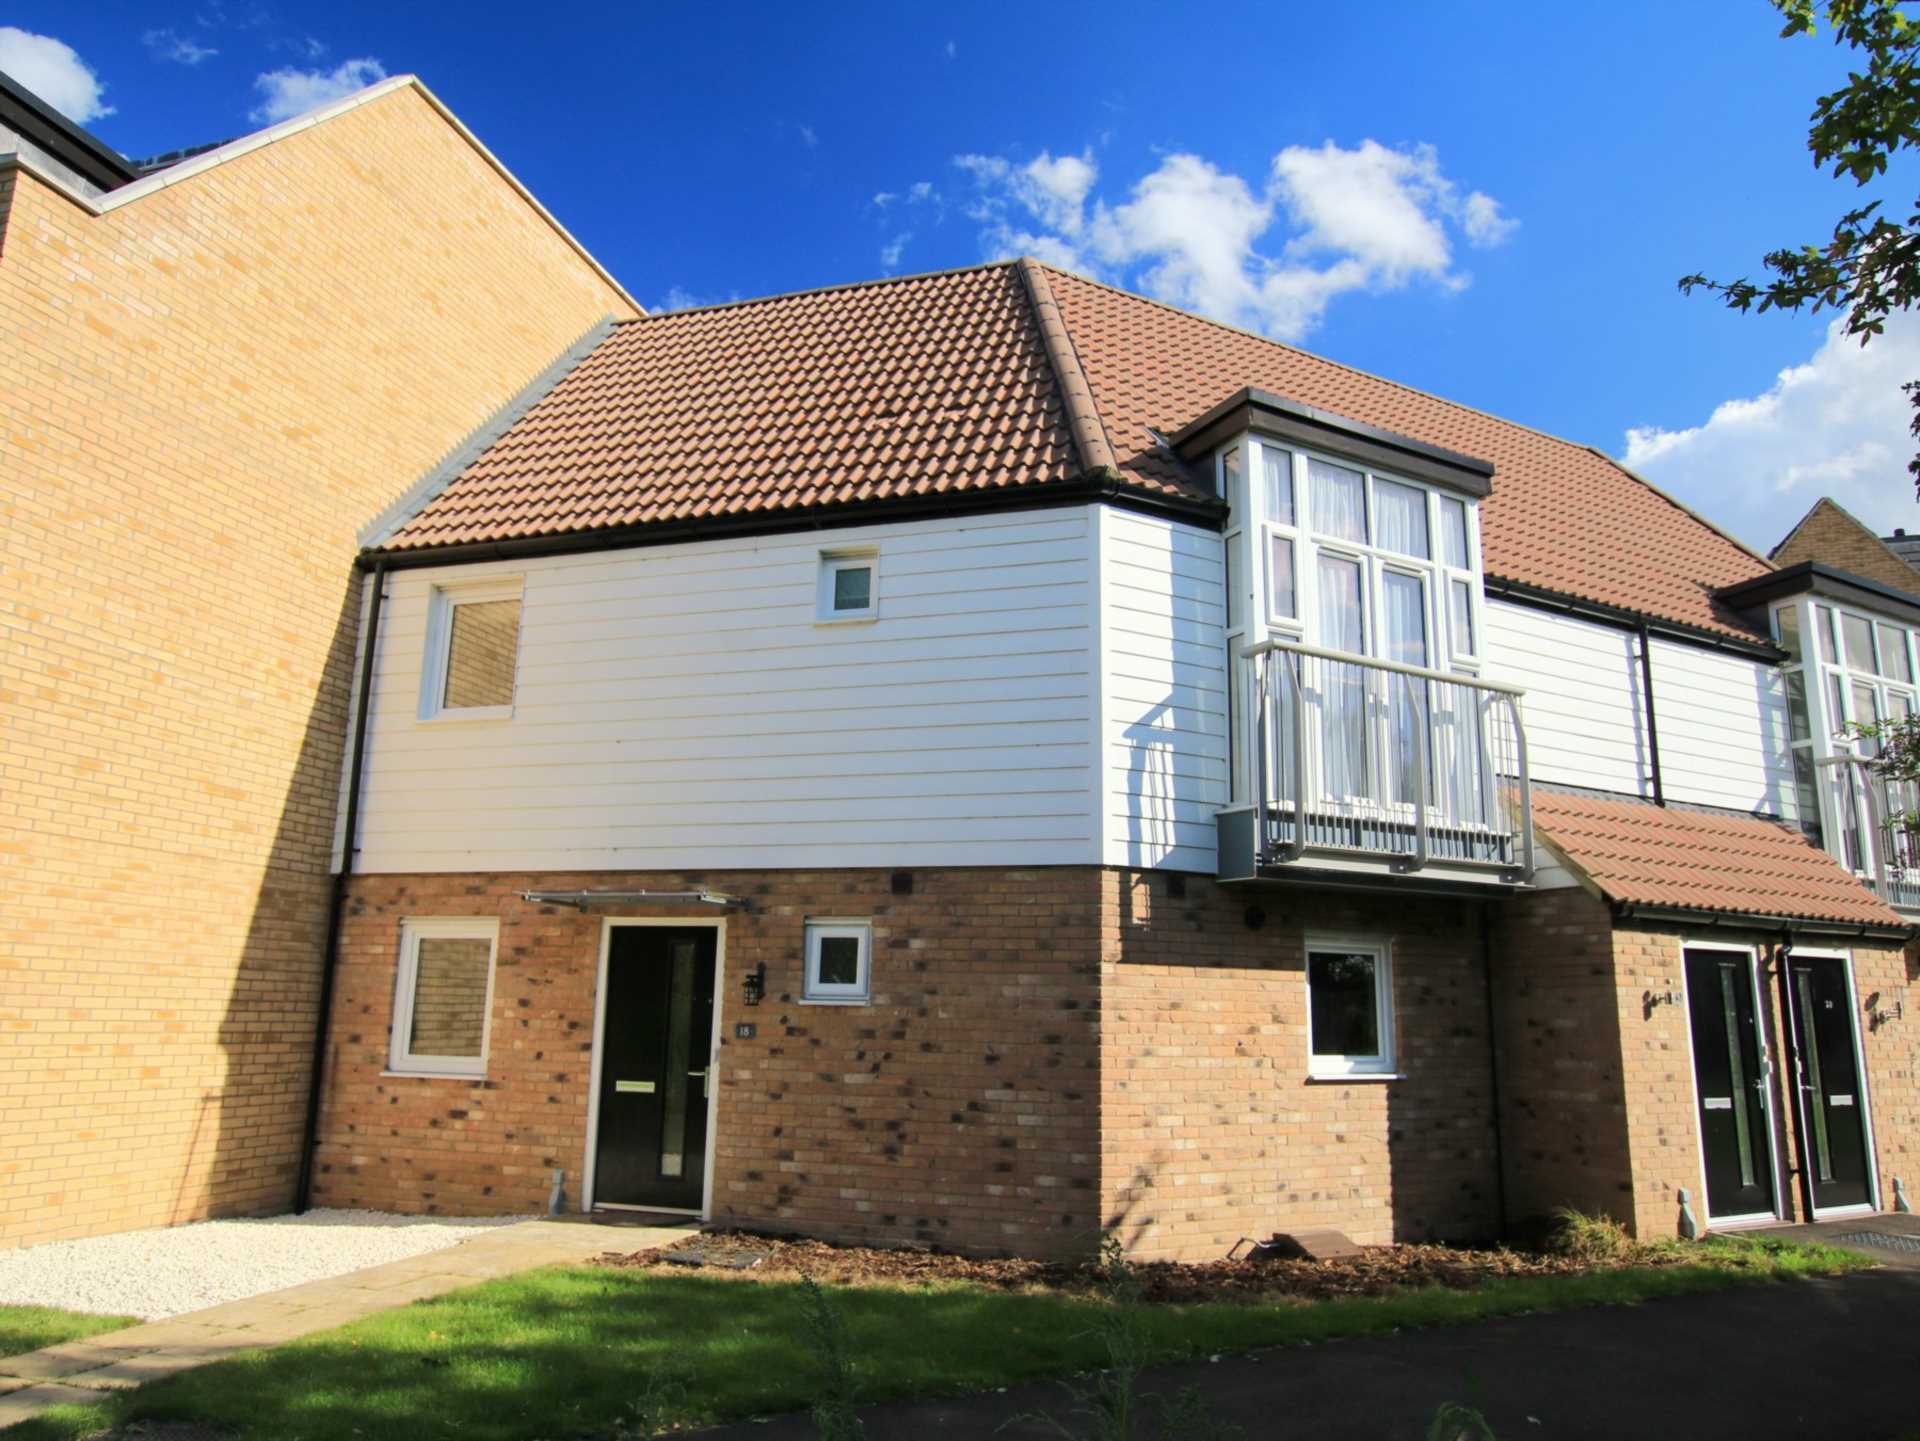 2 bed Apartment for rent in St Neots. From Noonan Crane Property Management